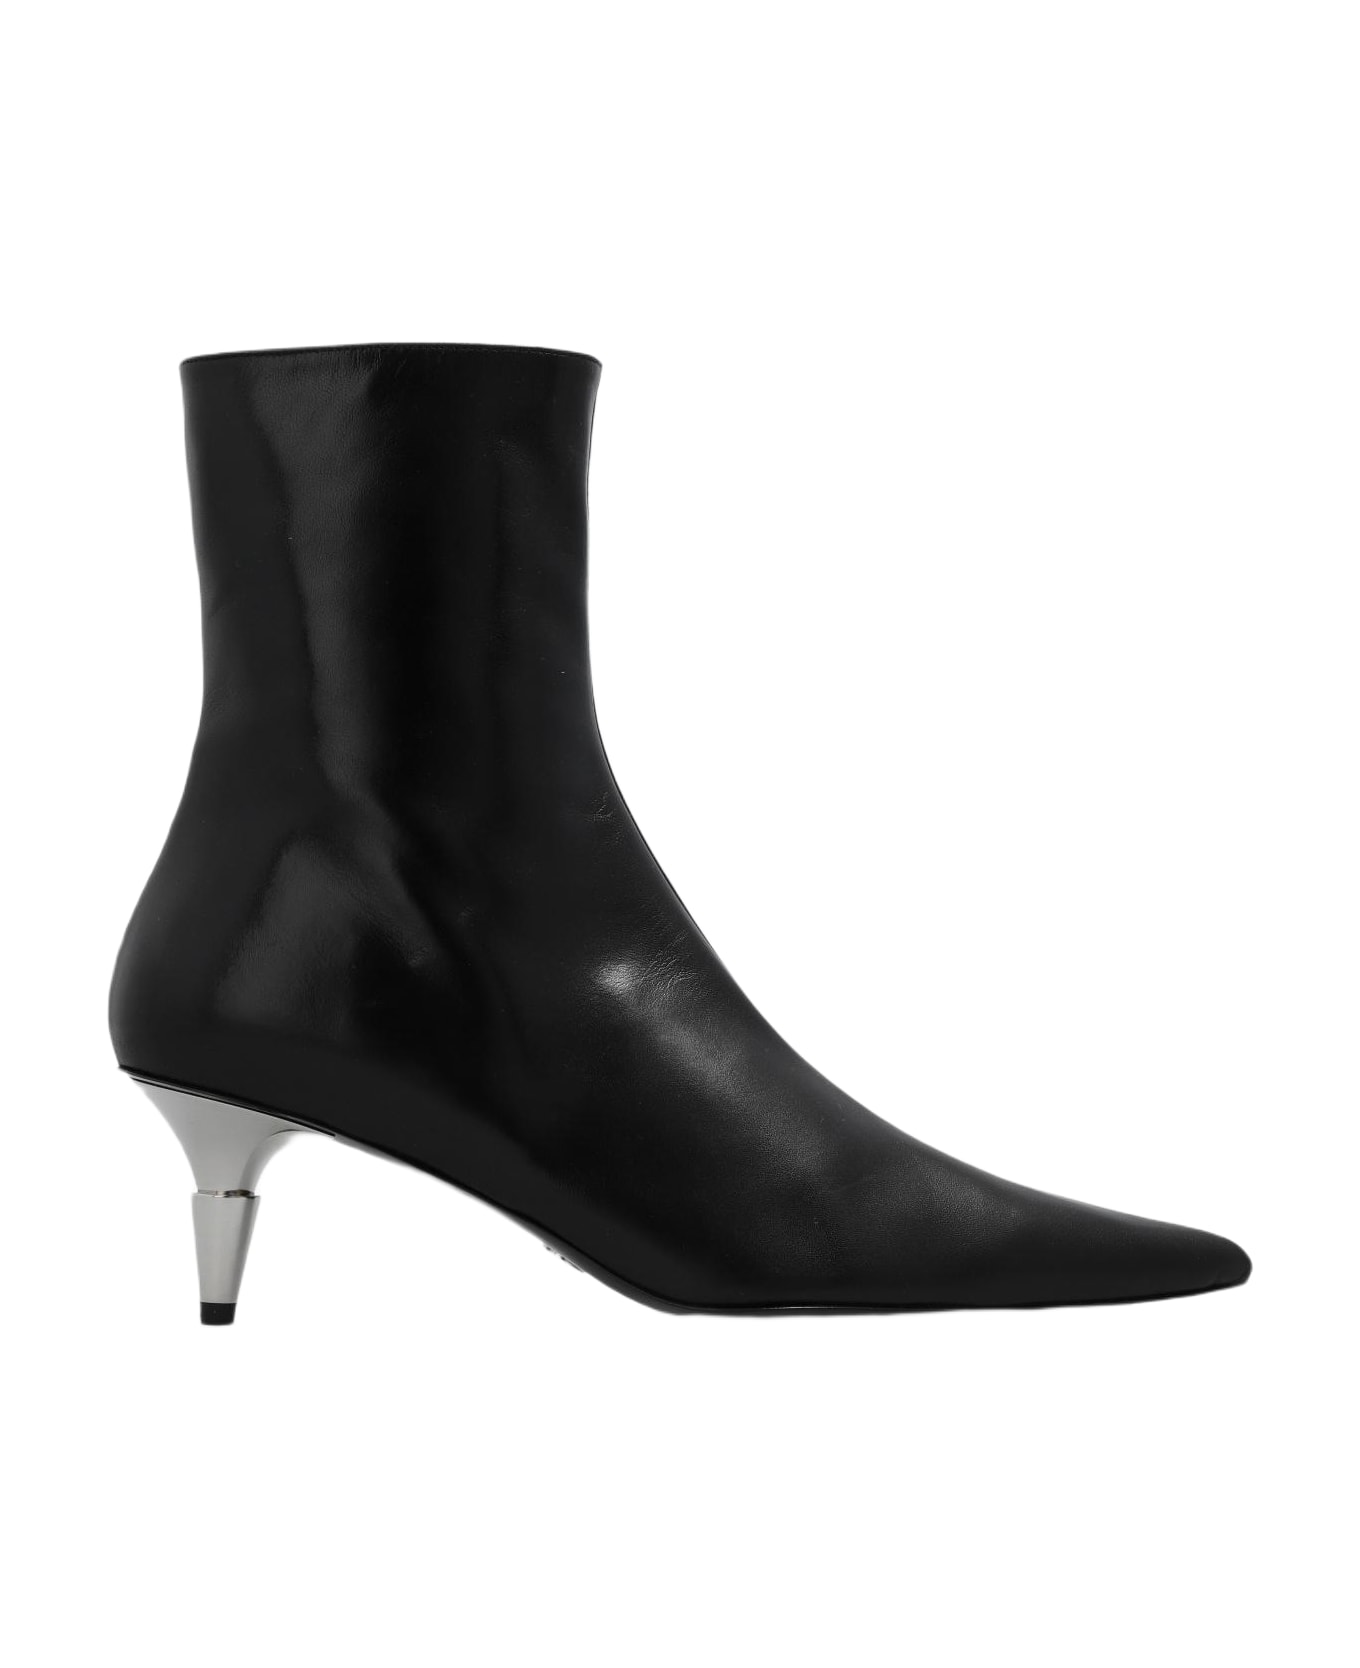 Proenza Schouler 'spike' Heeled Ankle Boots In Leather - Black ブーツ